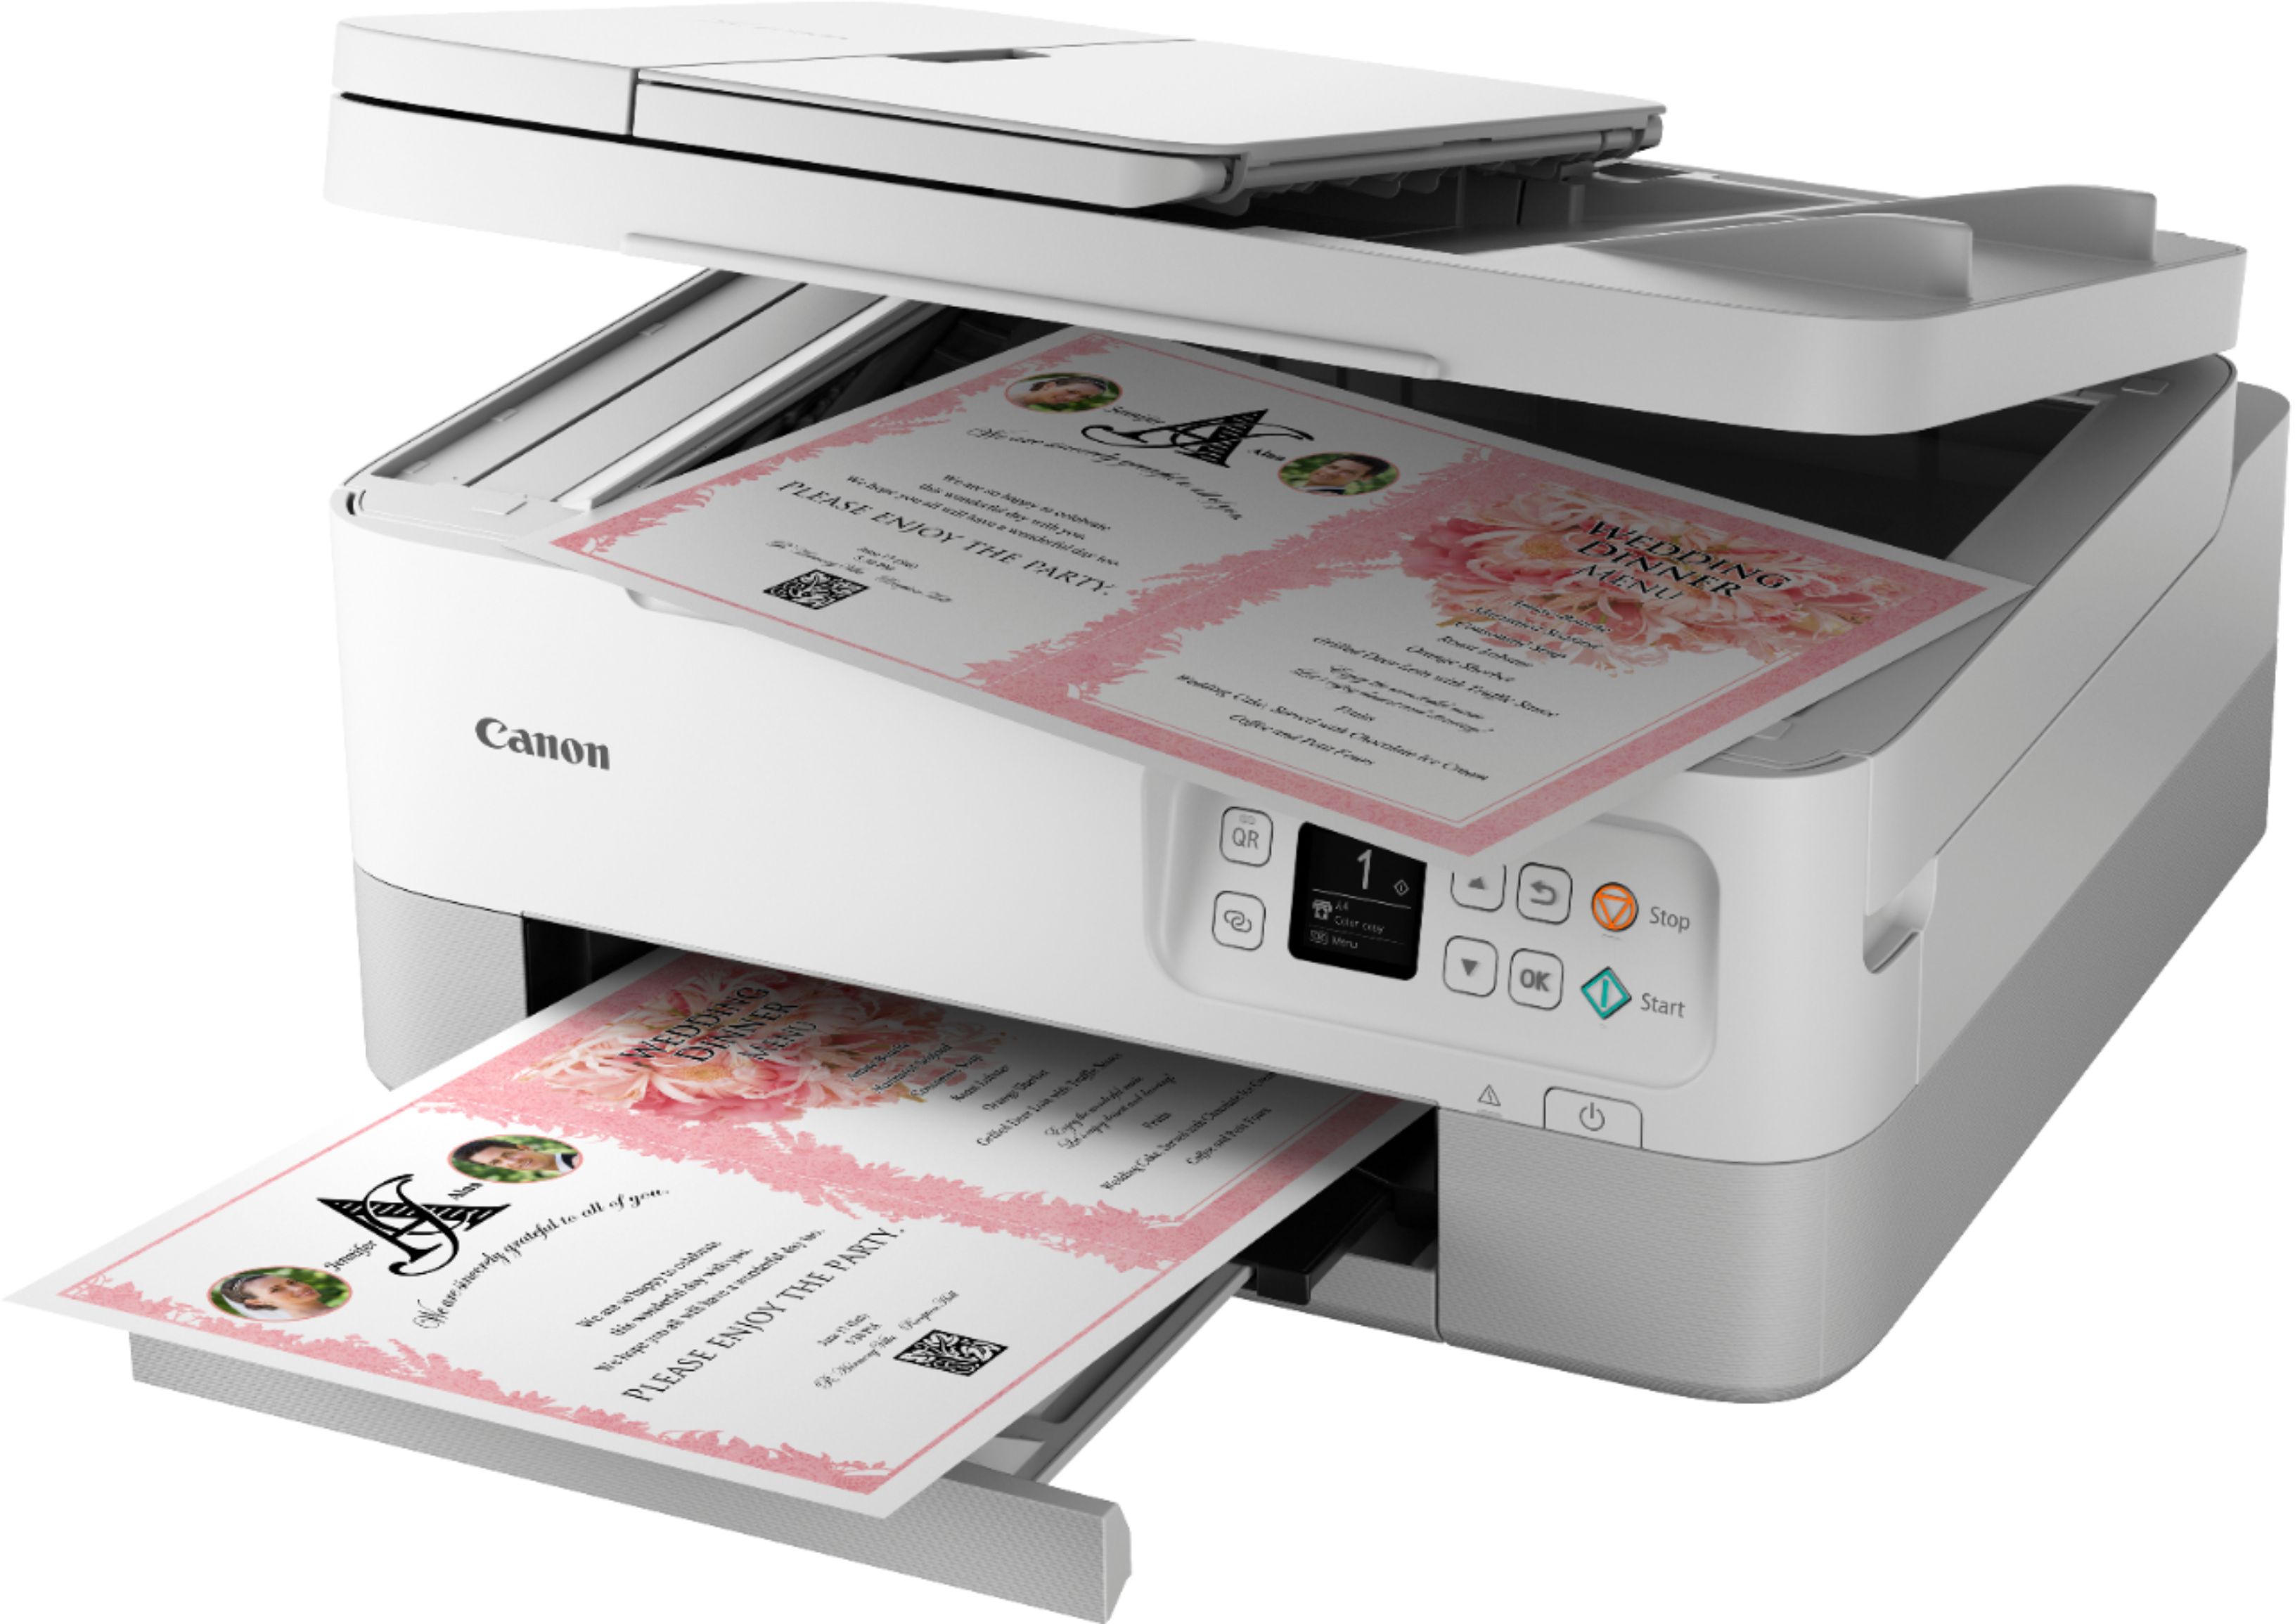 5072C008 - CANON PIXMA TR4650 All-in-One Wireless Inkjet Printer with Fax -  Currys Business